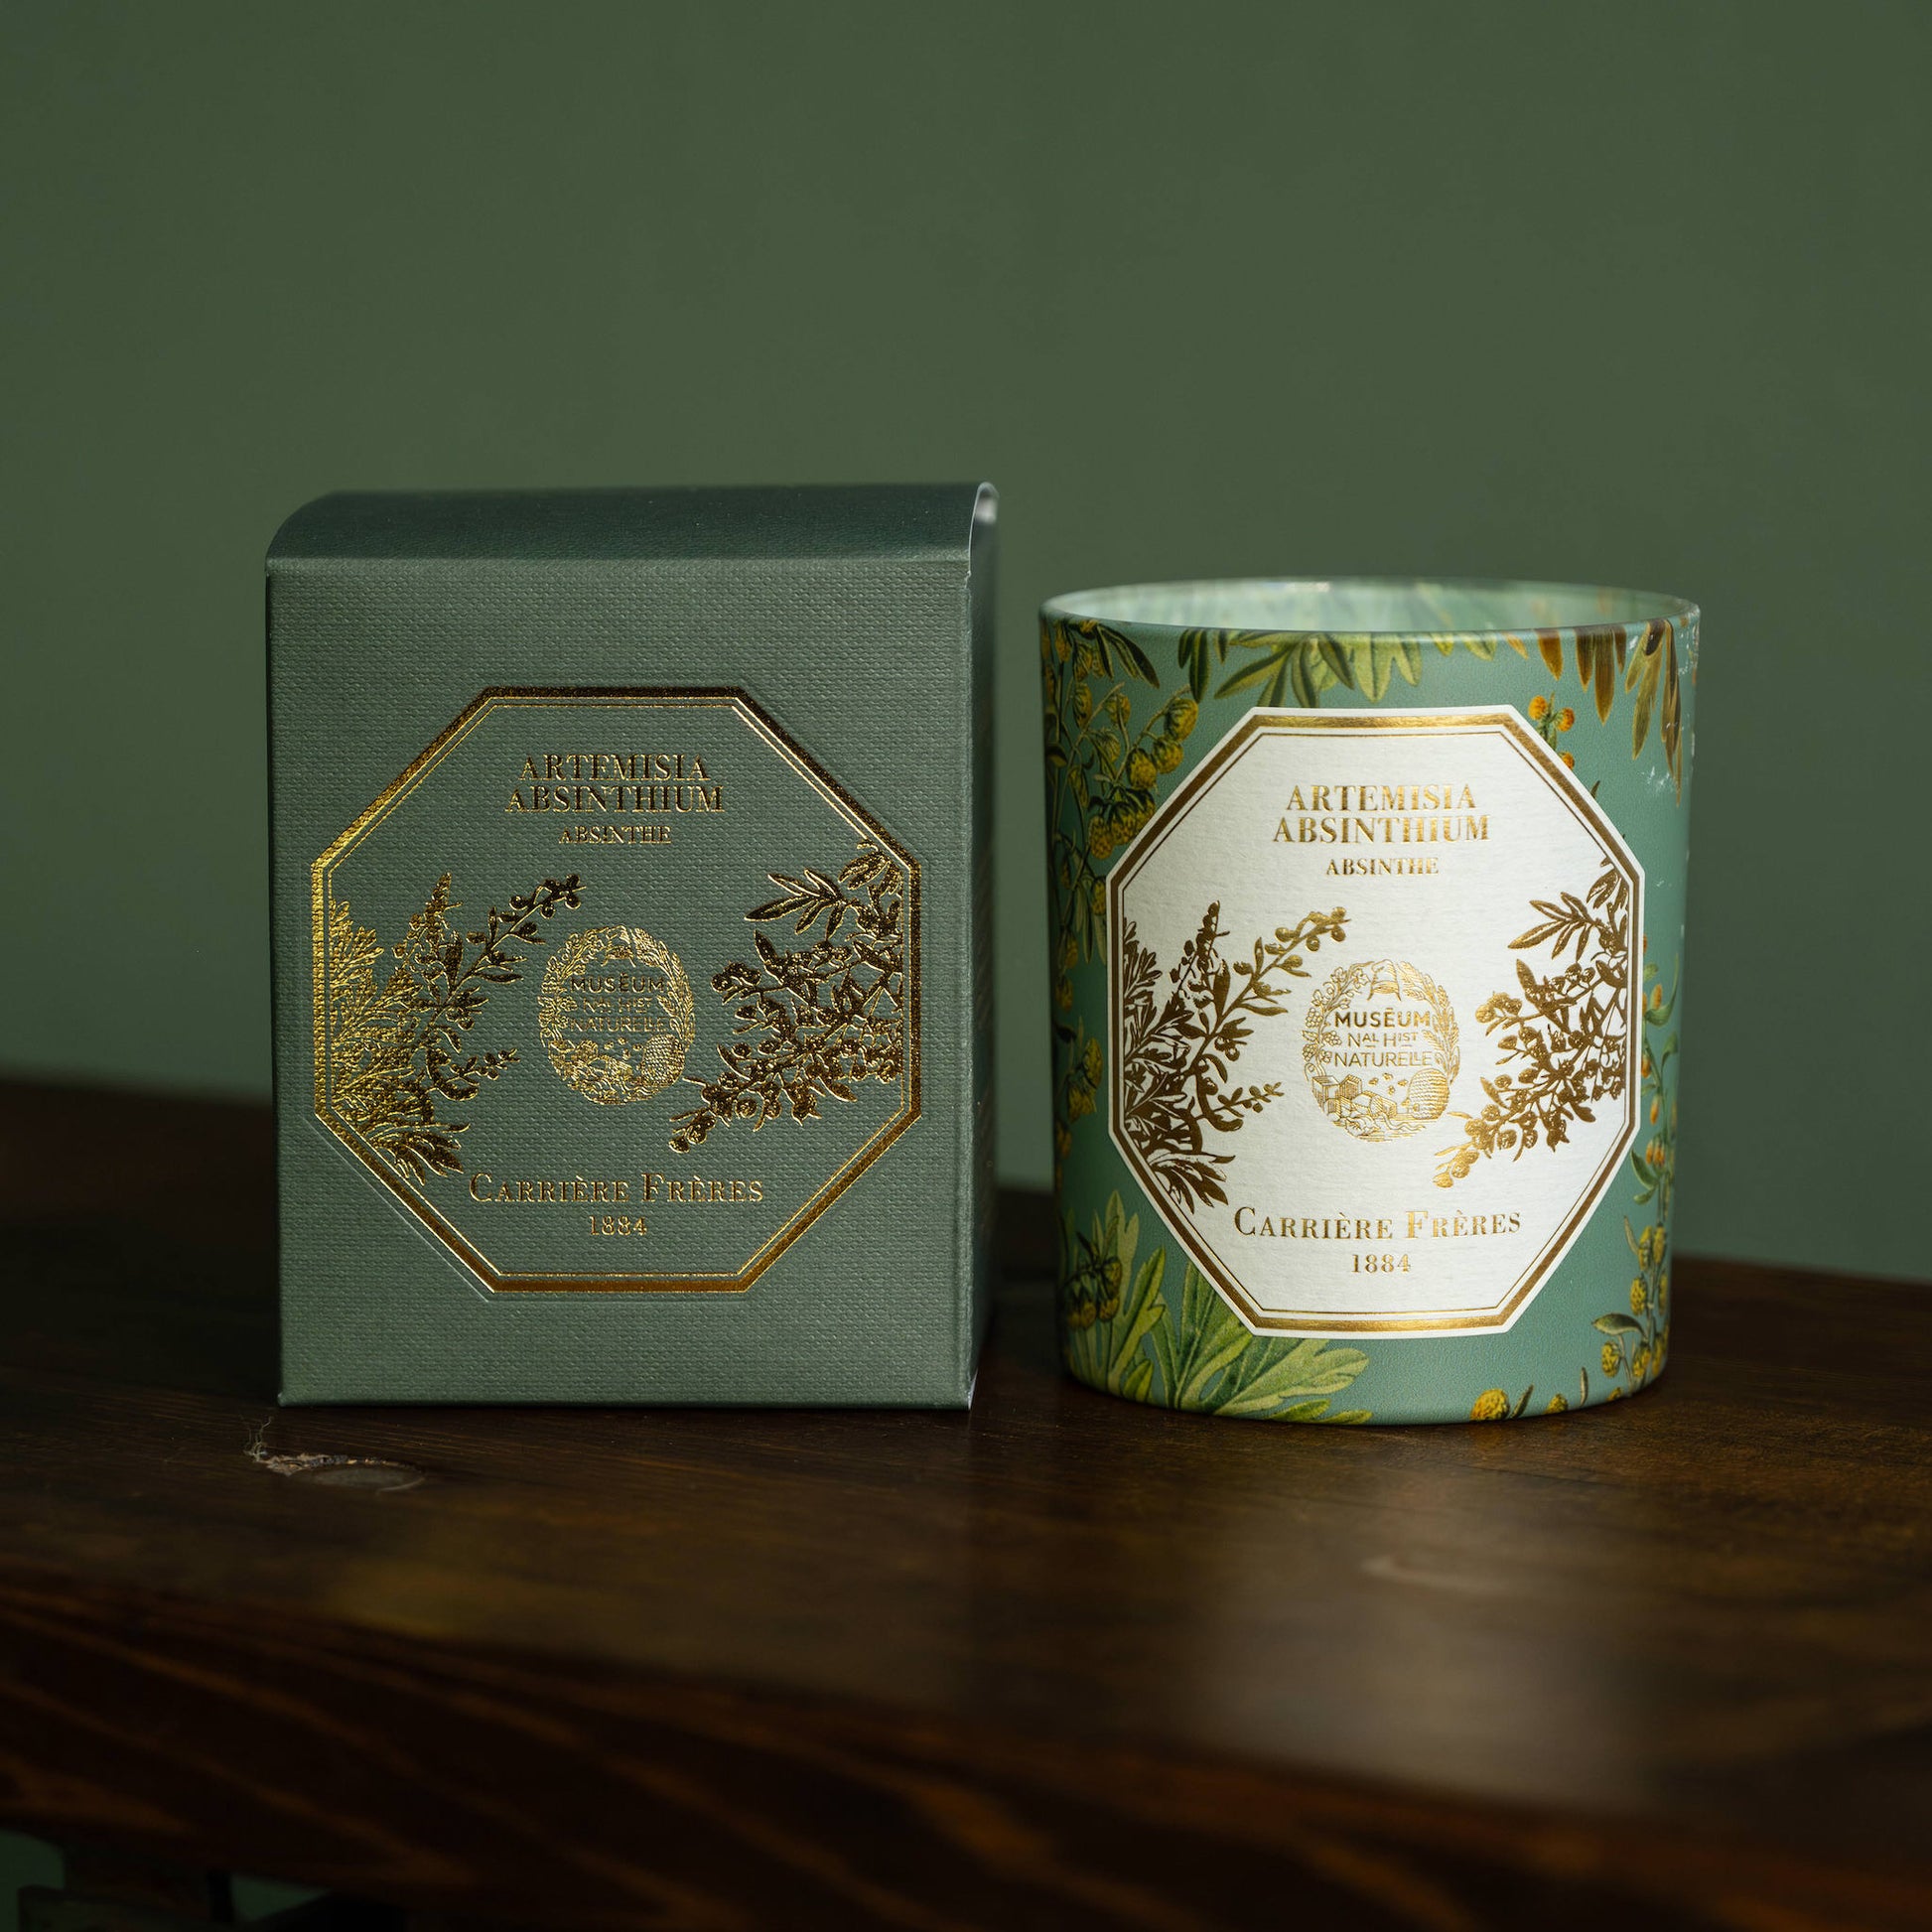 Carriere Freres Absinthe Scented Candle & Box